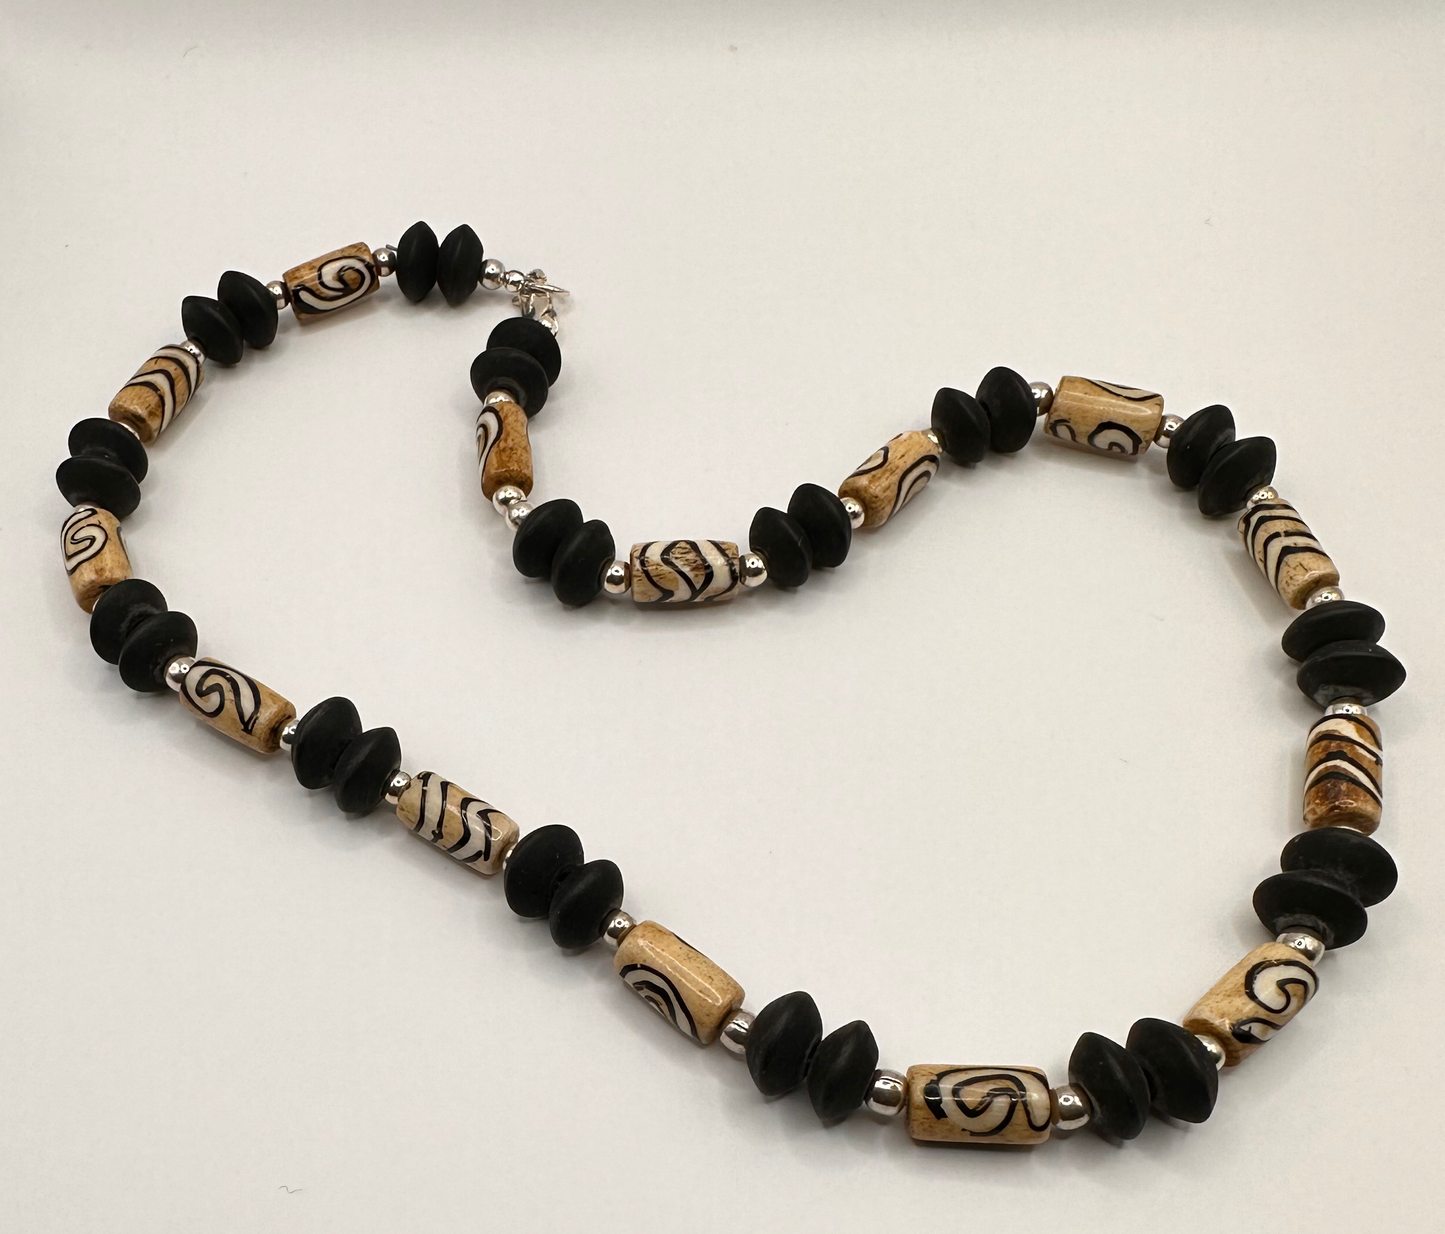 Art Deco Beads with Black Jasper Accent Bead Necklace